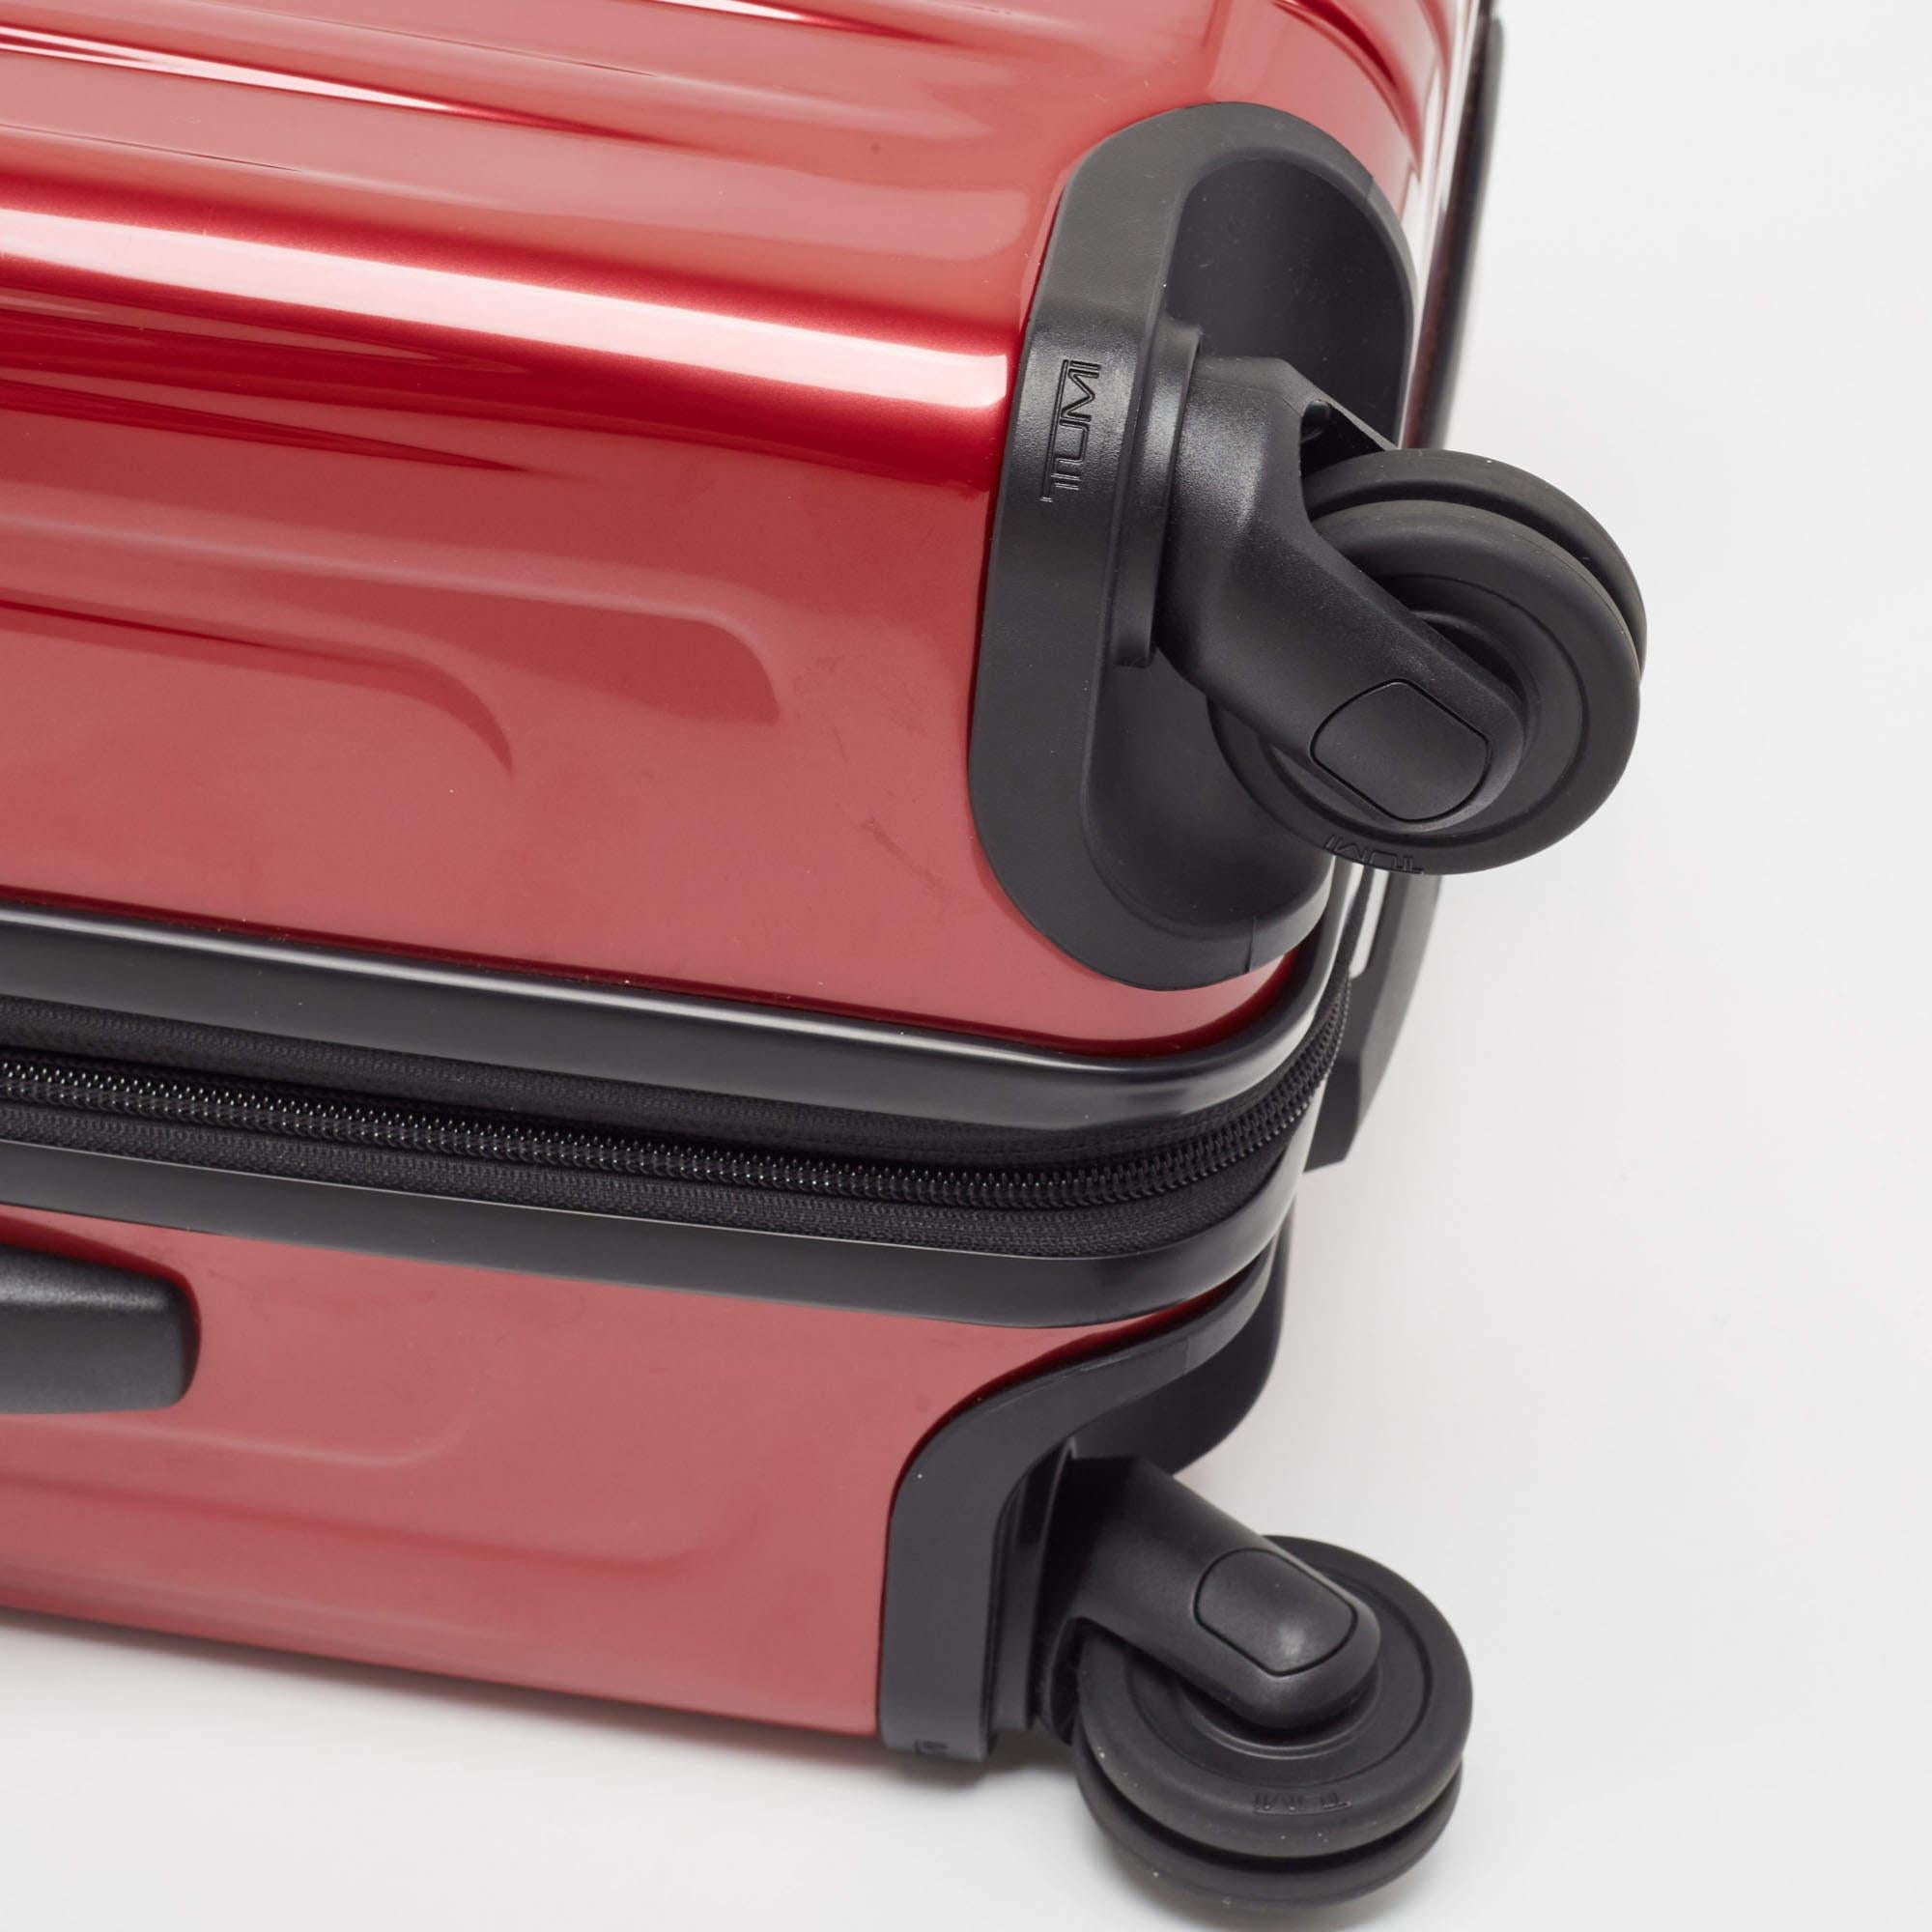 TUMI Red 4 Wheeled V4 International Expandable Carry On Luggage (Bagages à main extensibles à 4 roues) en vente 3